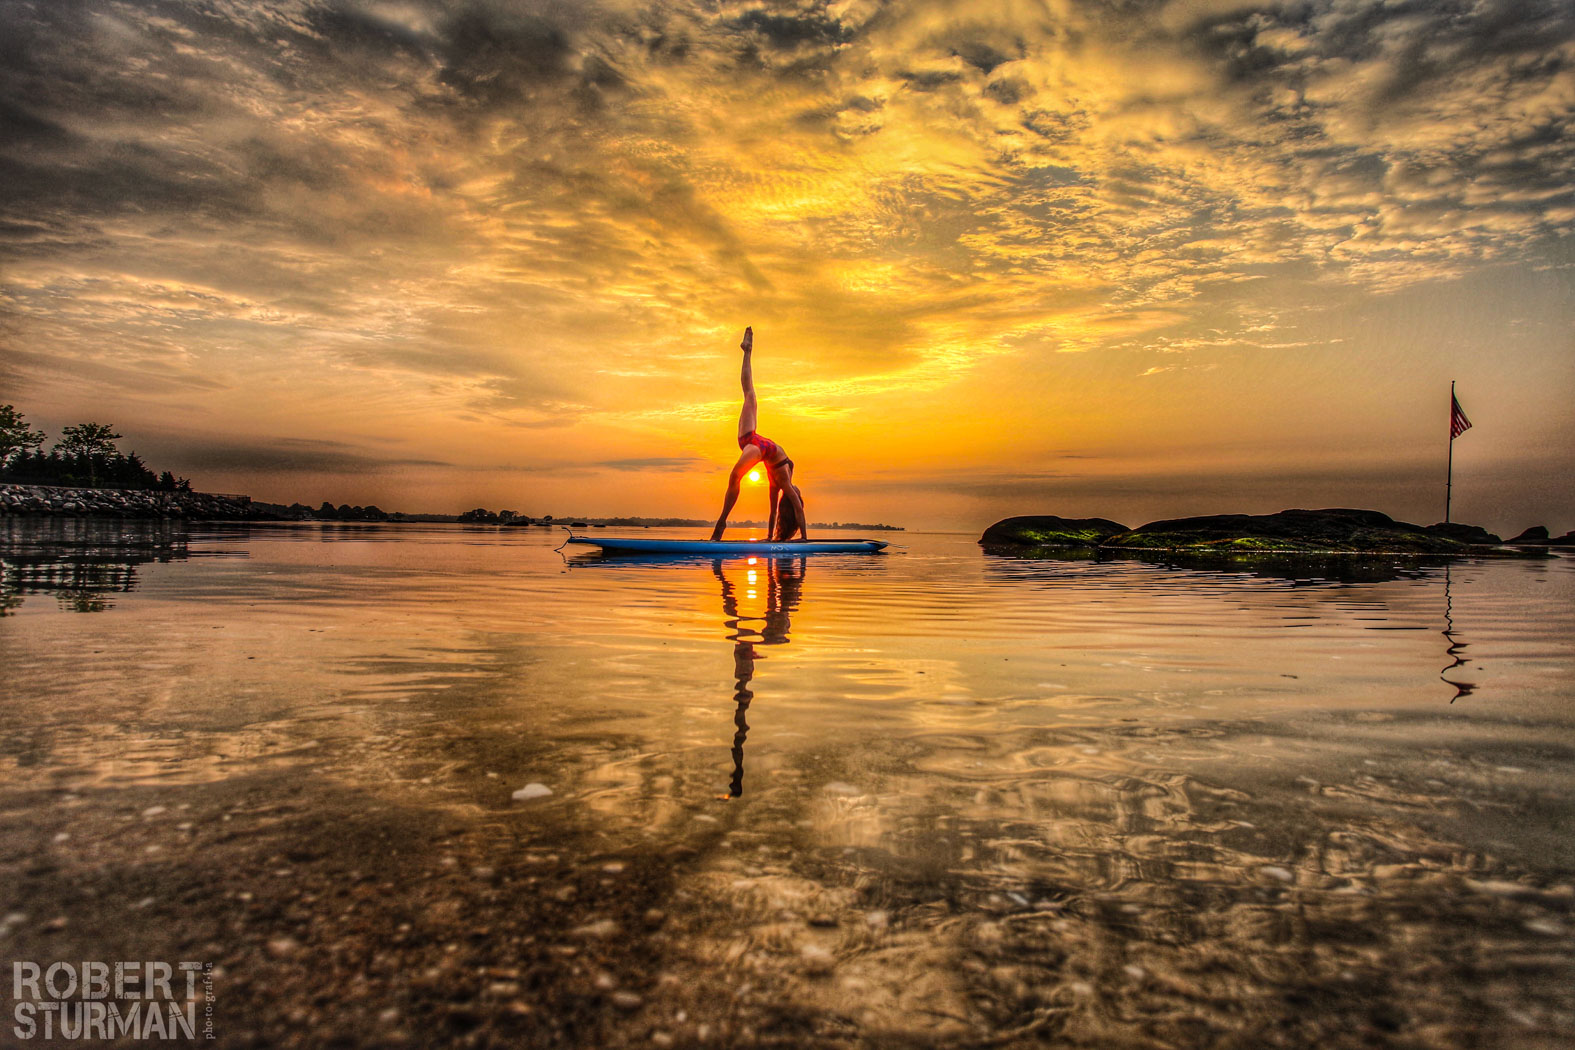 View of a woman on a paddle board doing a yoga pose on sunset